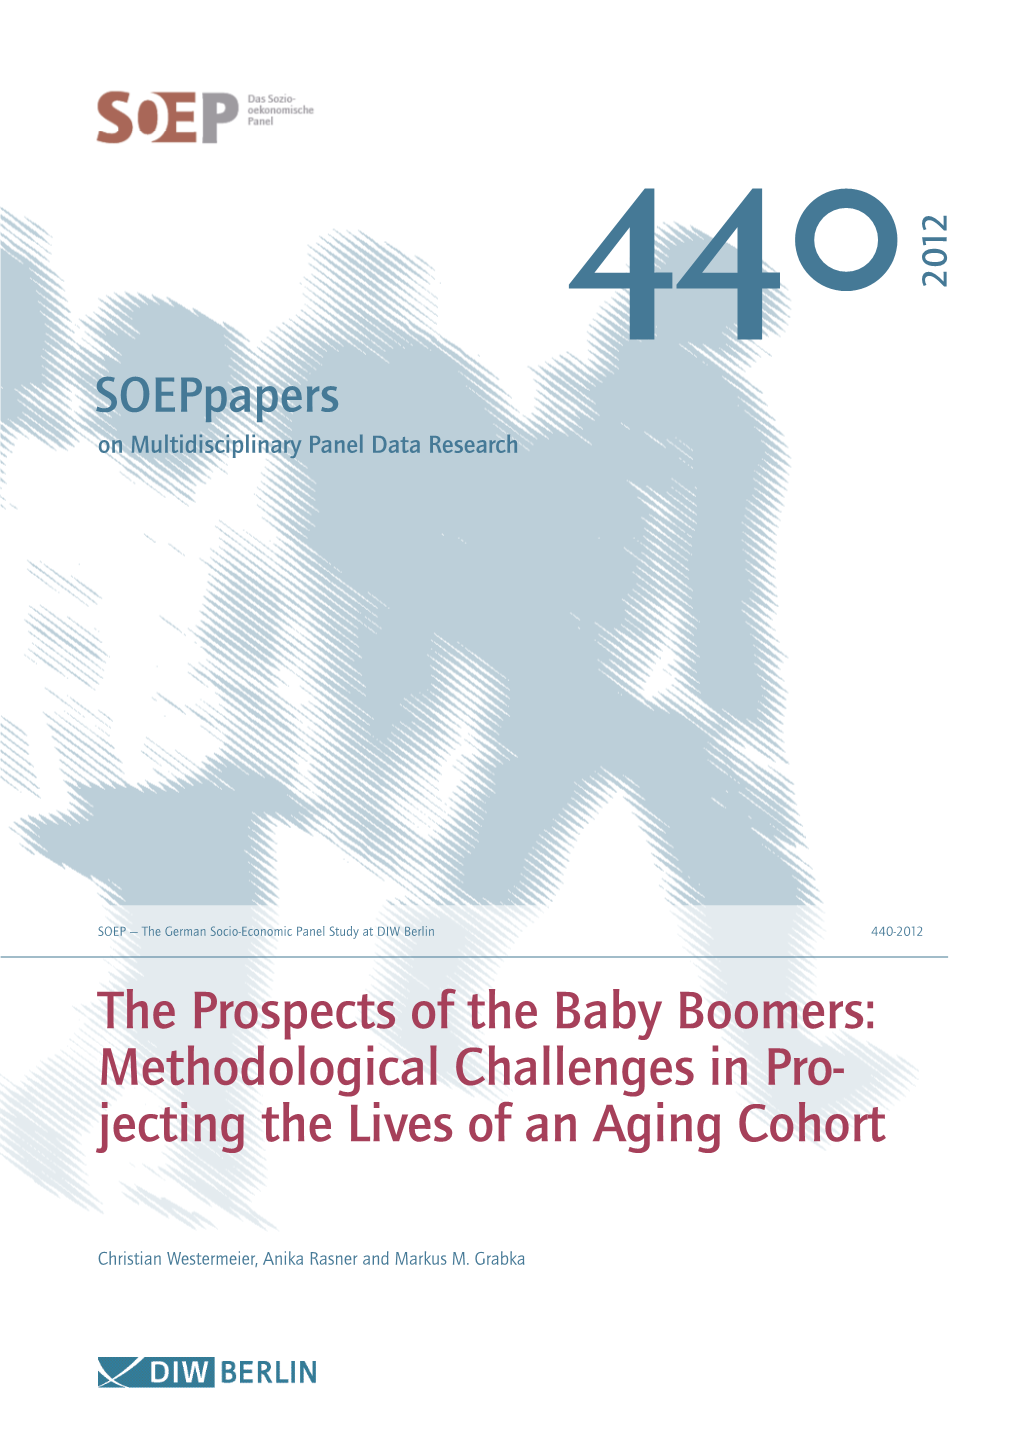 The Prospects of the Baby Boomers: Methodological Challenges in Pro- Jecting the Lives of an Aging Cohort